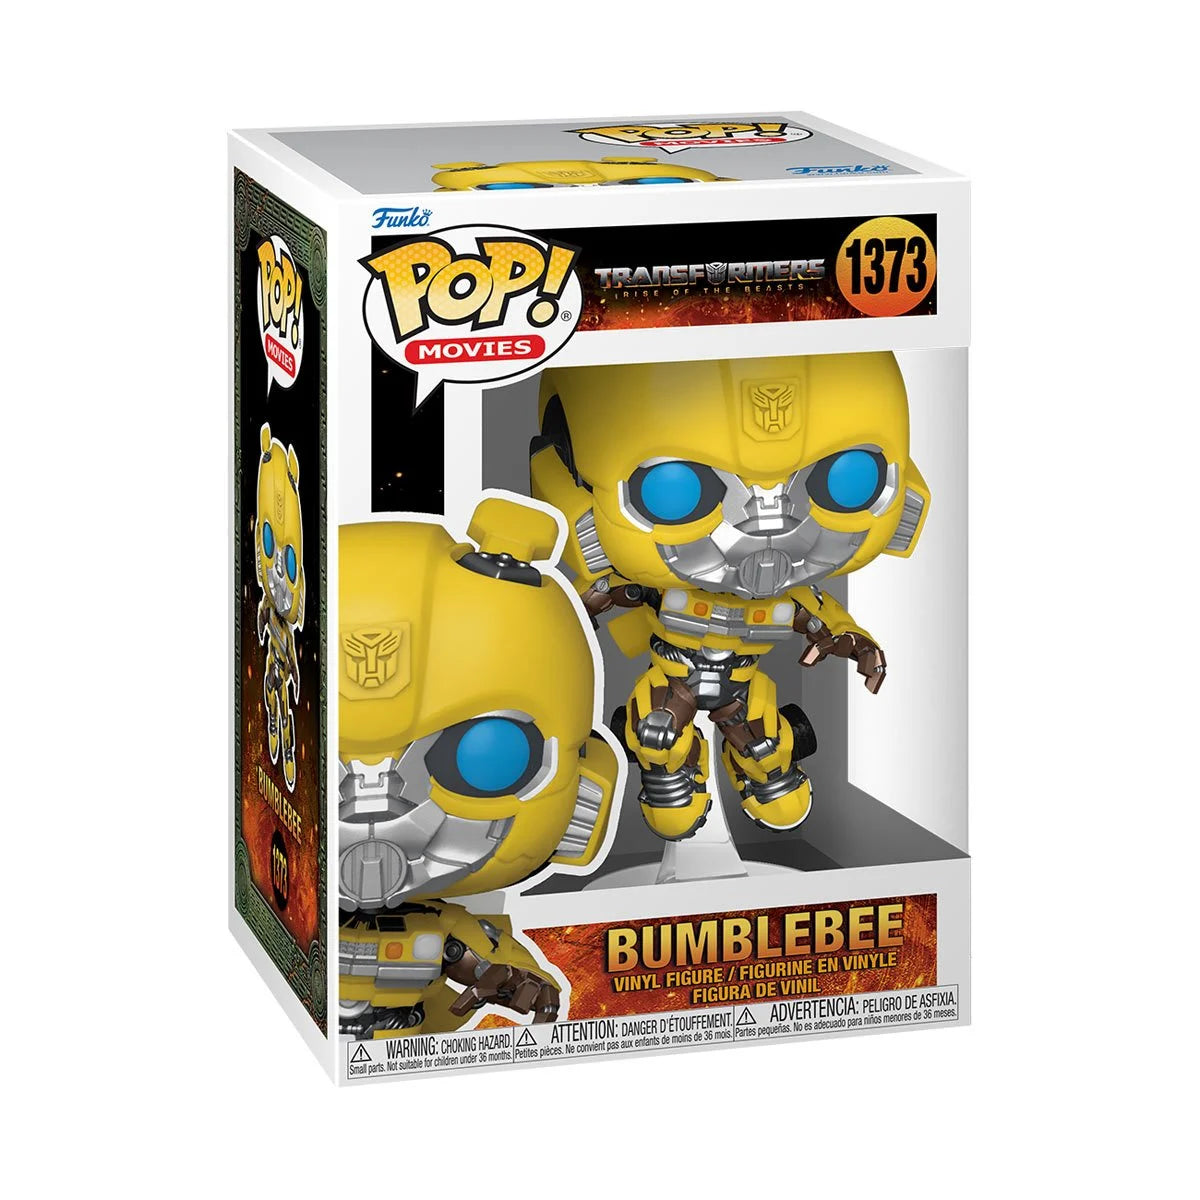 Transformers: Rise of the Beasts Bumblebee Funko Pop! Vinyl Figure #1373 in a box - Heretoserveyou